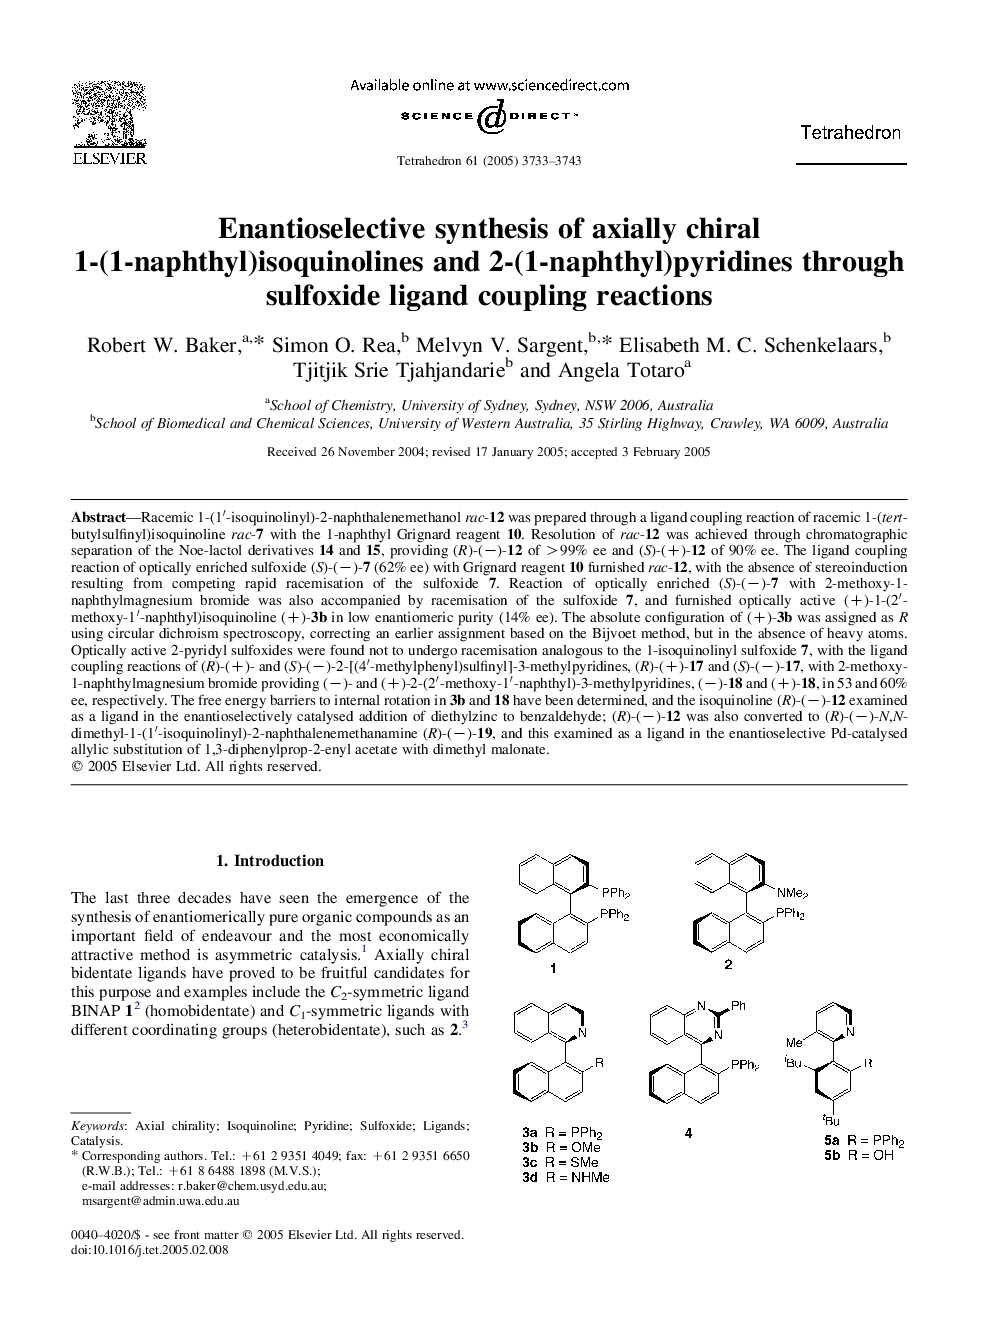 Enantioselective synthesis of axially chiral 1-(1-naphthyl)isoquinolines and 2-(1-naphthyl)pyridines through sulfoxide ligand coupling reactions